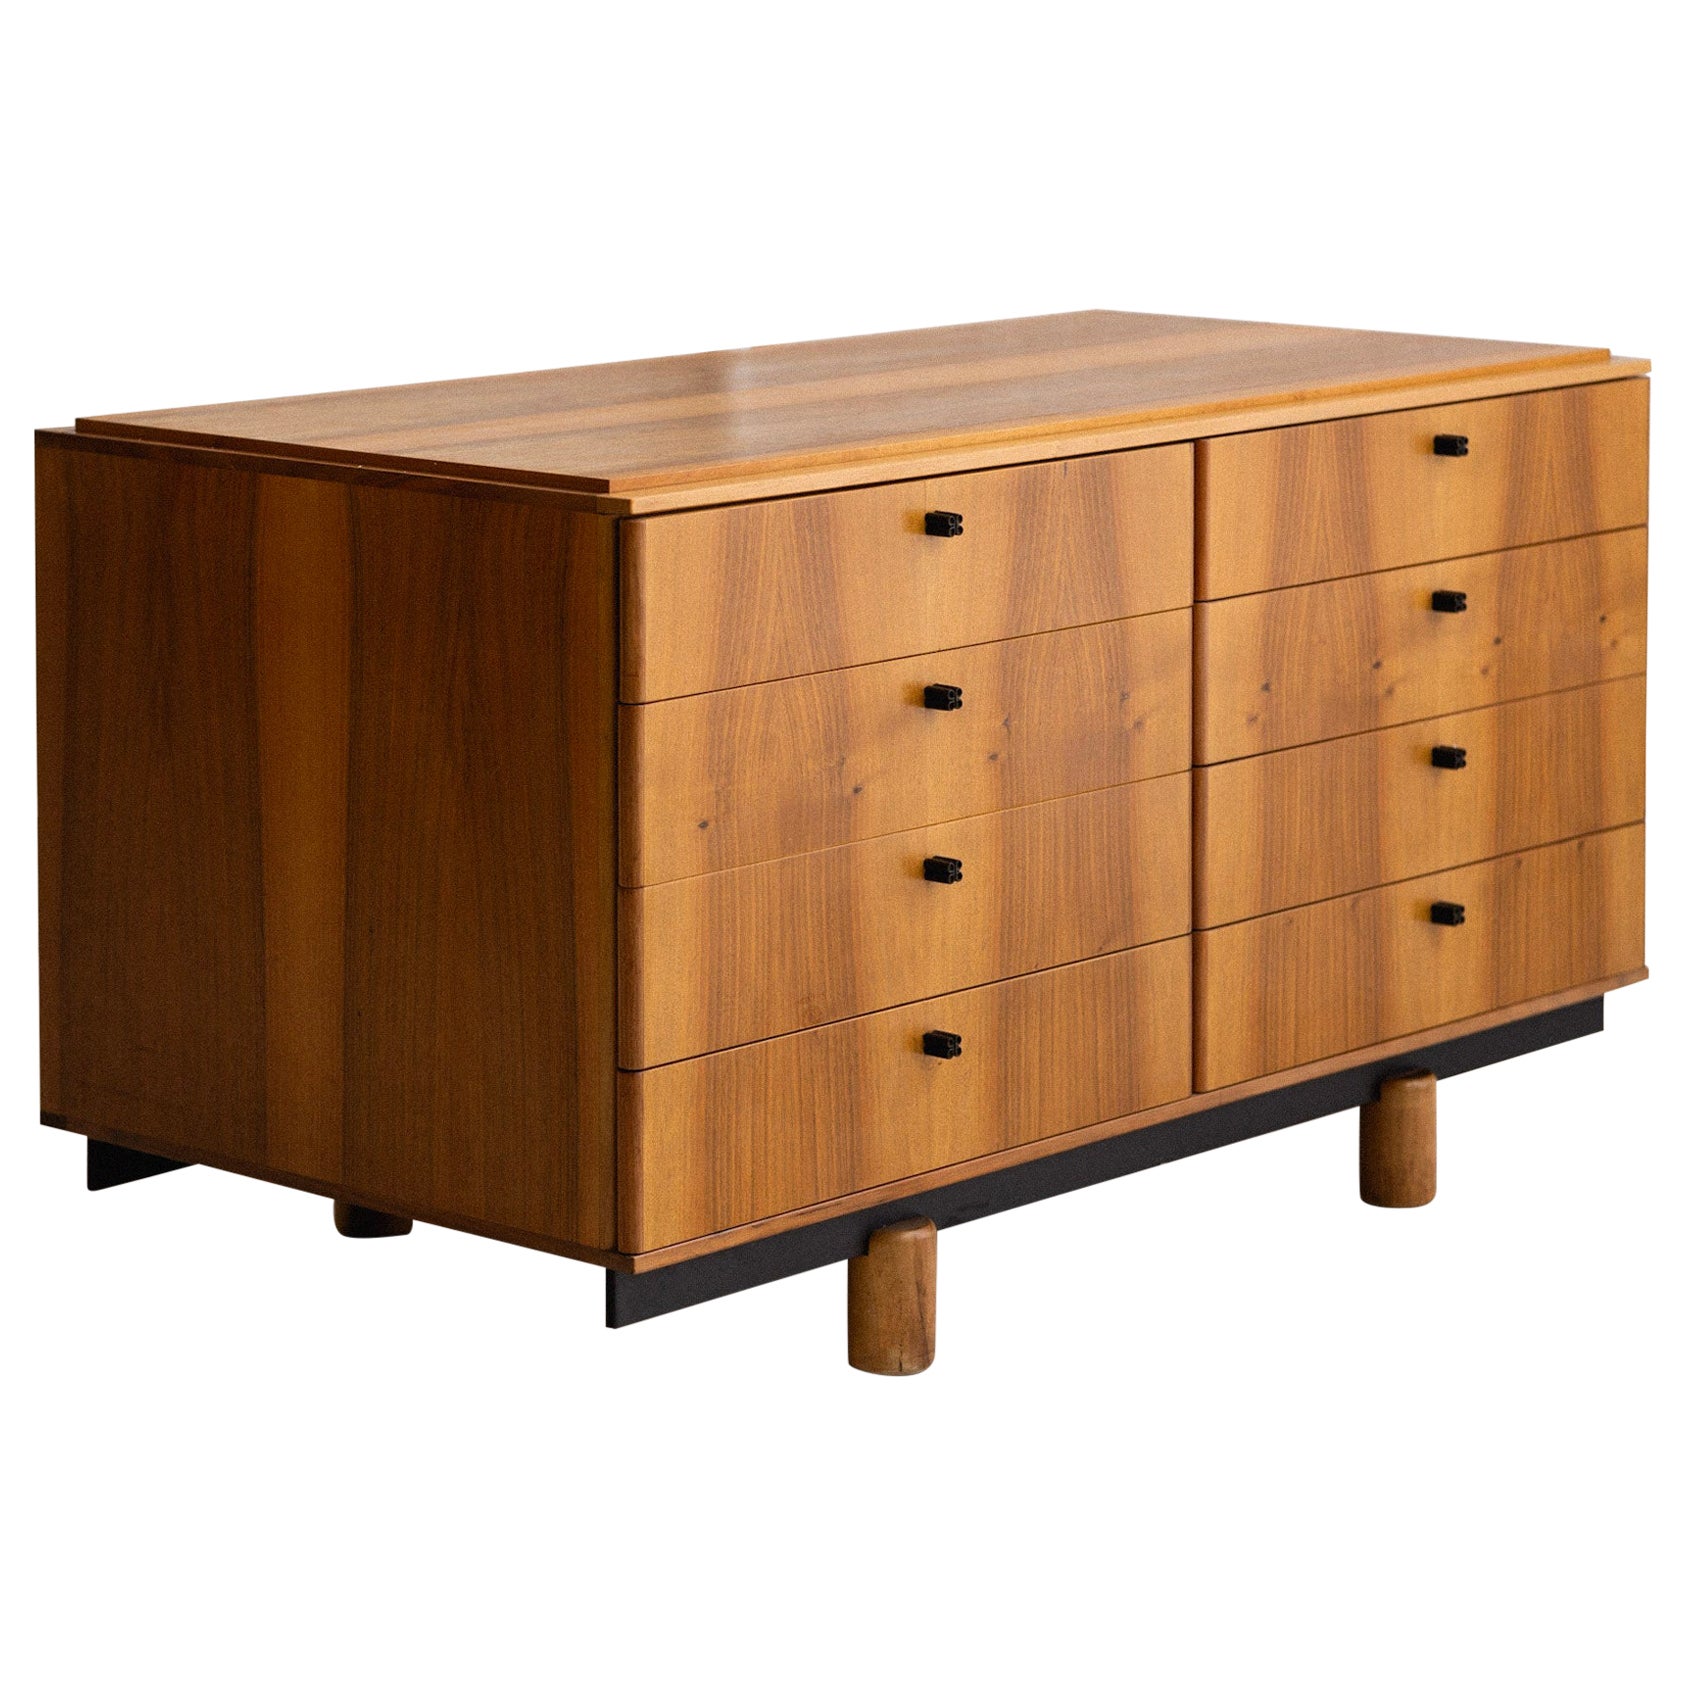 ‘Ovunque 807’ Modular 8 Drawer Sideboard by Gianfranco Frattini for Bernini For Sale